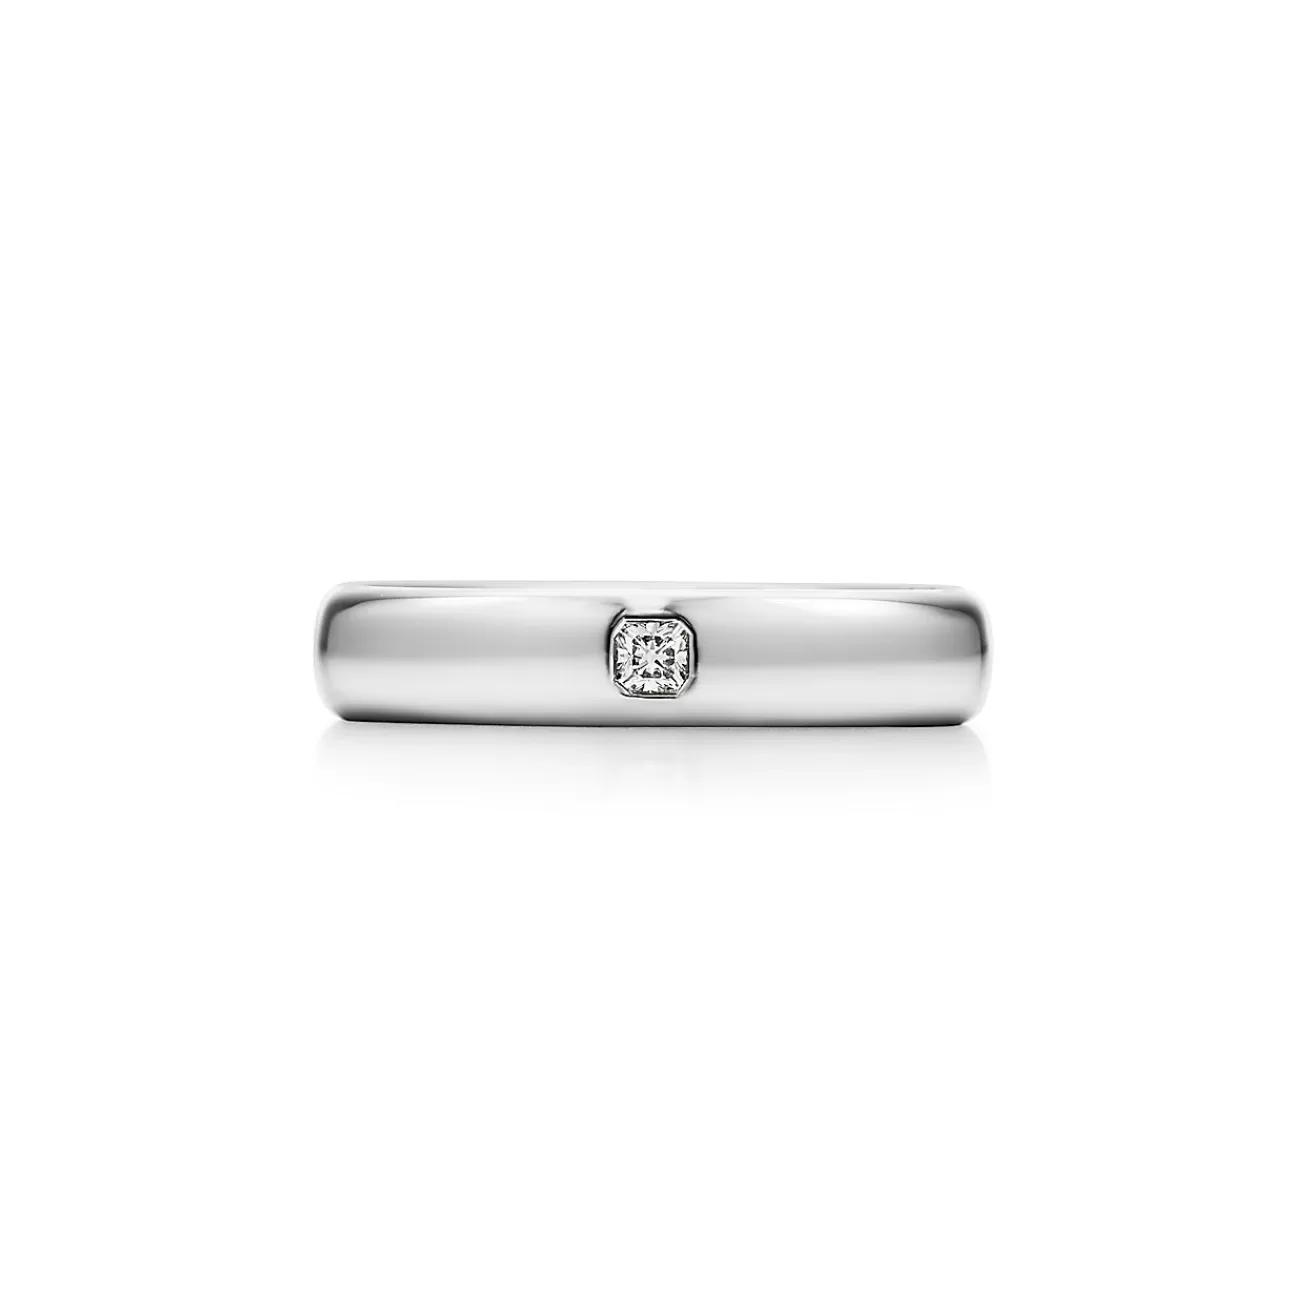 Tiffany & Co. Tiffany Forever Wedding Band Ring in Platinum with a Diamond, 4 mm Wide | ^ Rings | Platinum Jewelry